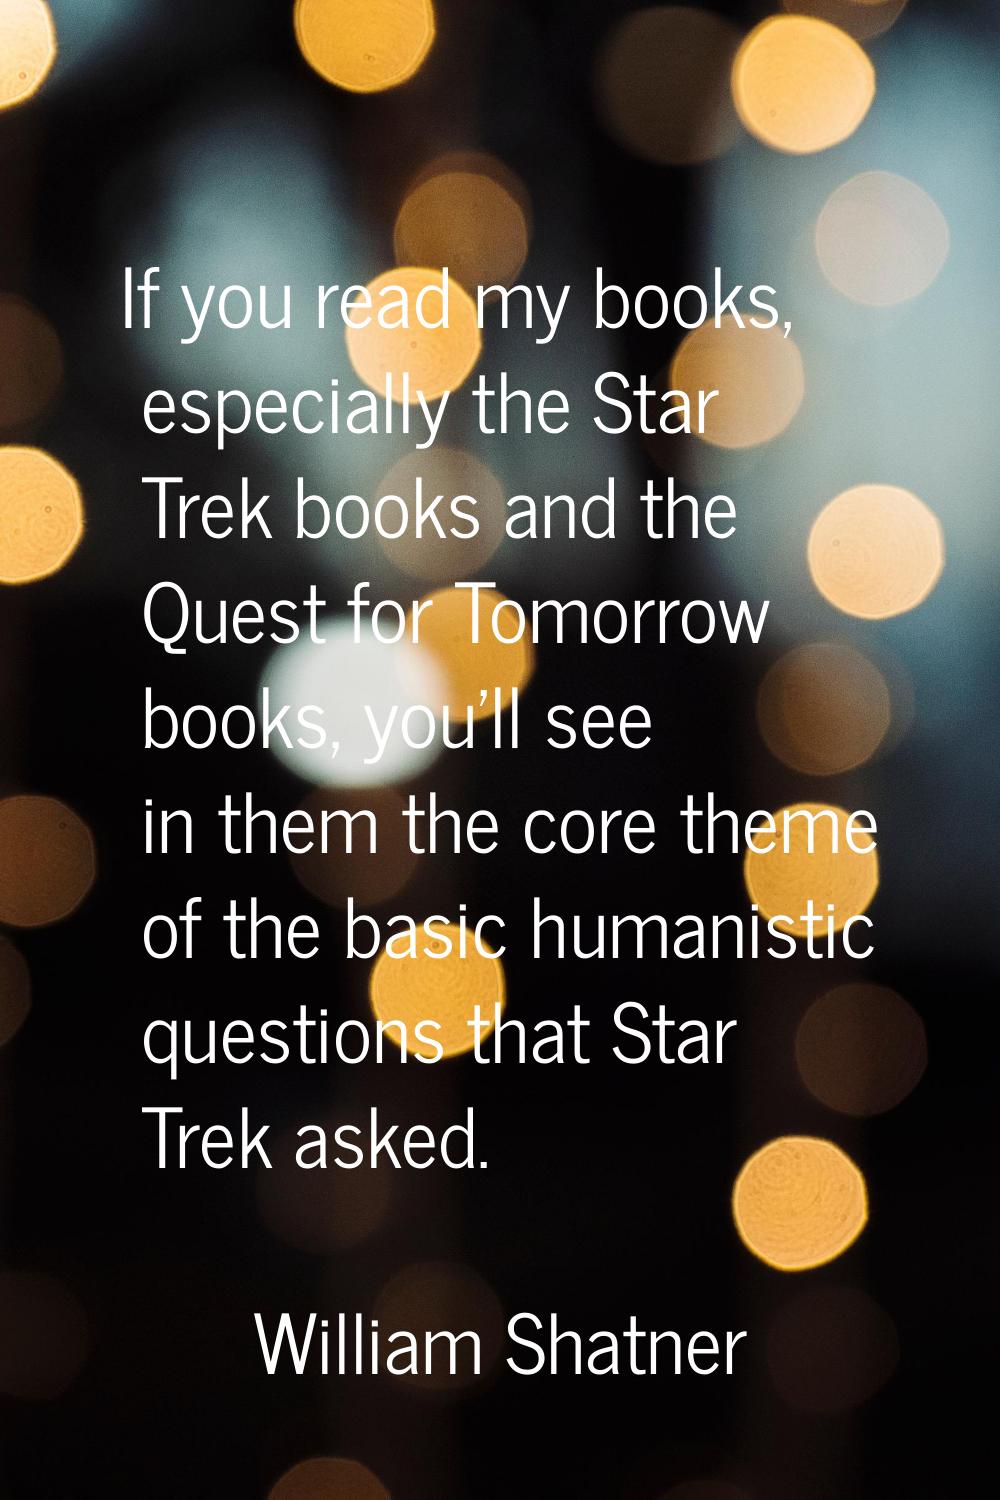 If you read my books, especially the Star Trek books and the Quest for Tomorrow books, you'll see i